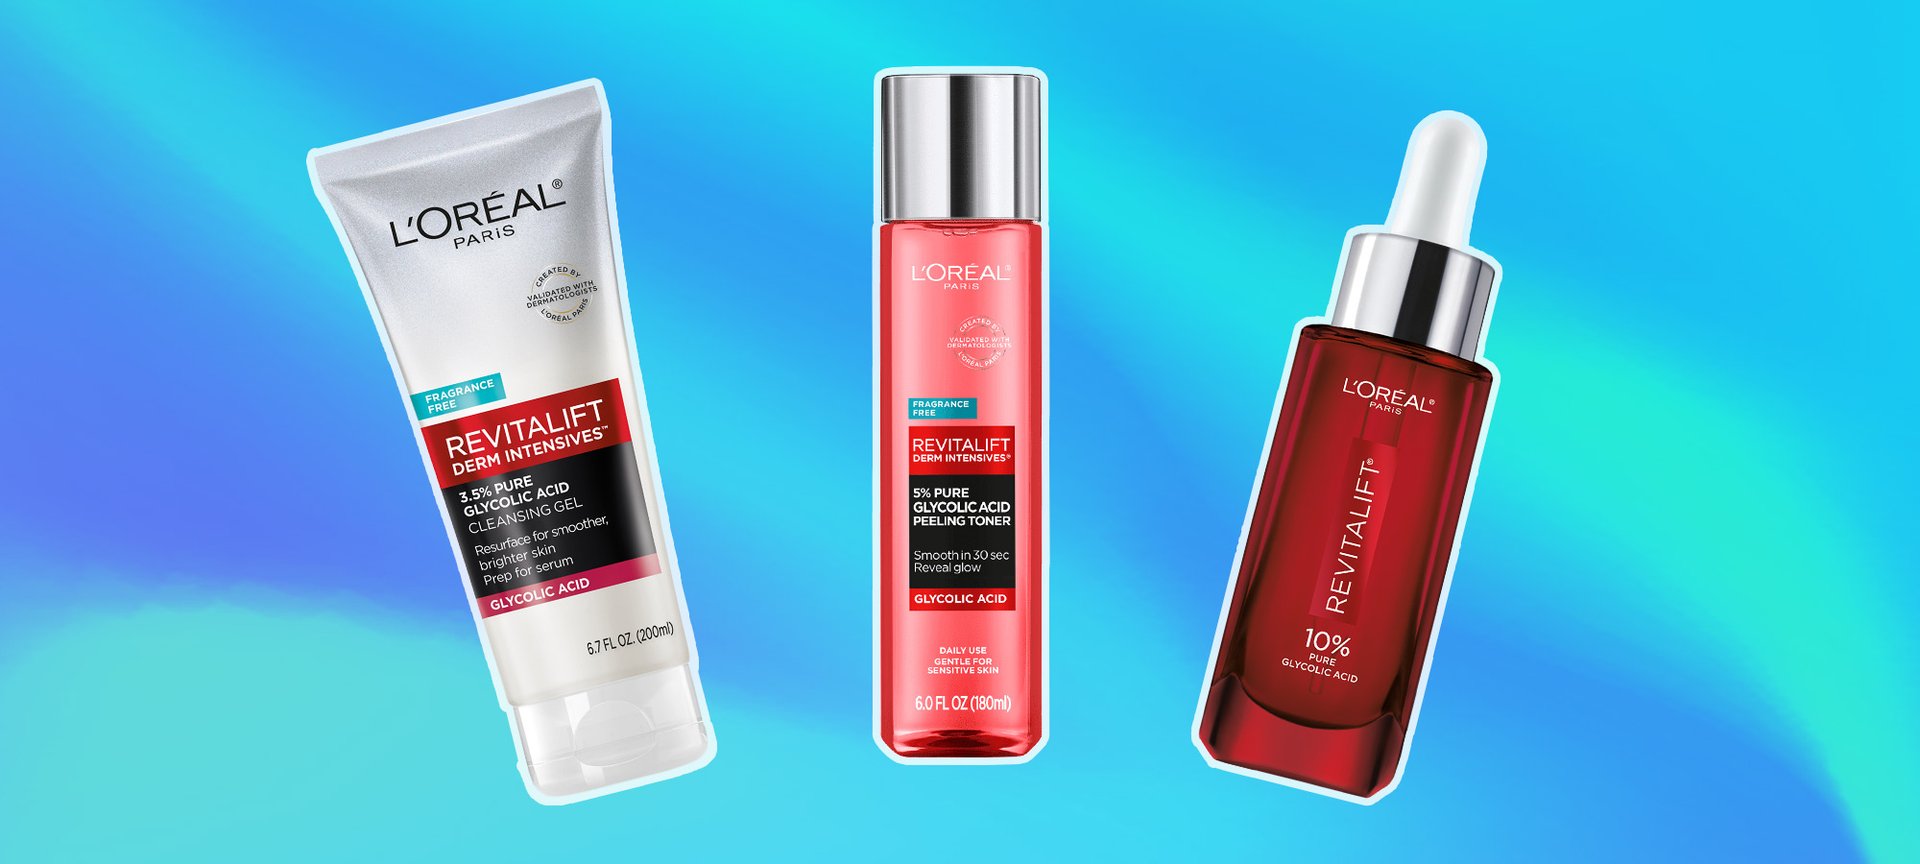 Glycolic Acid Products For Every Step In Your Routine